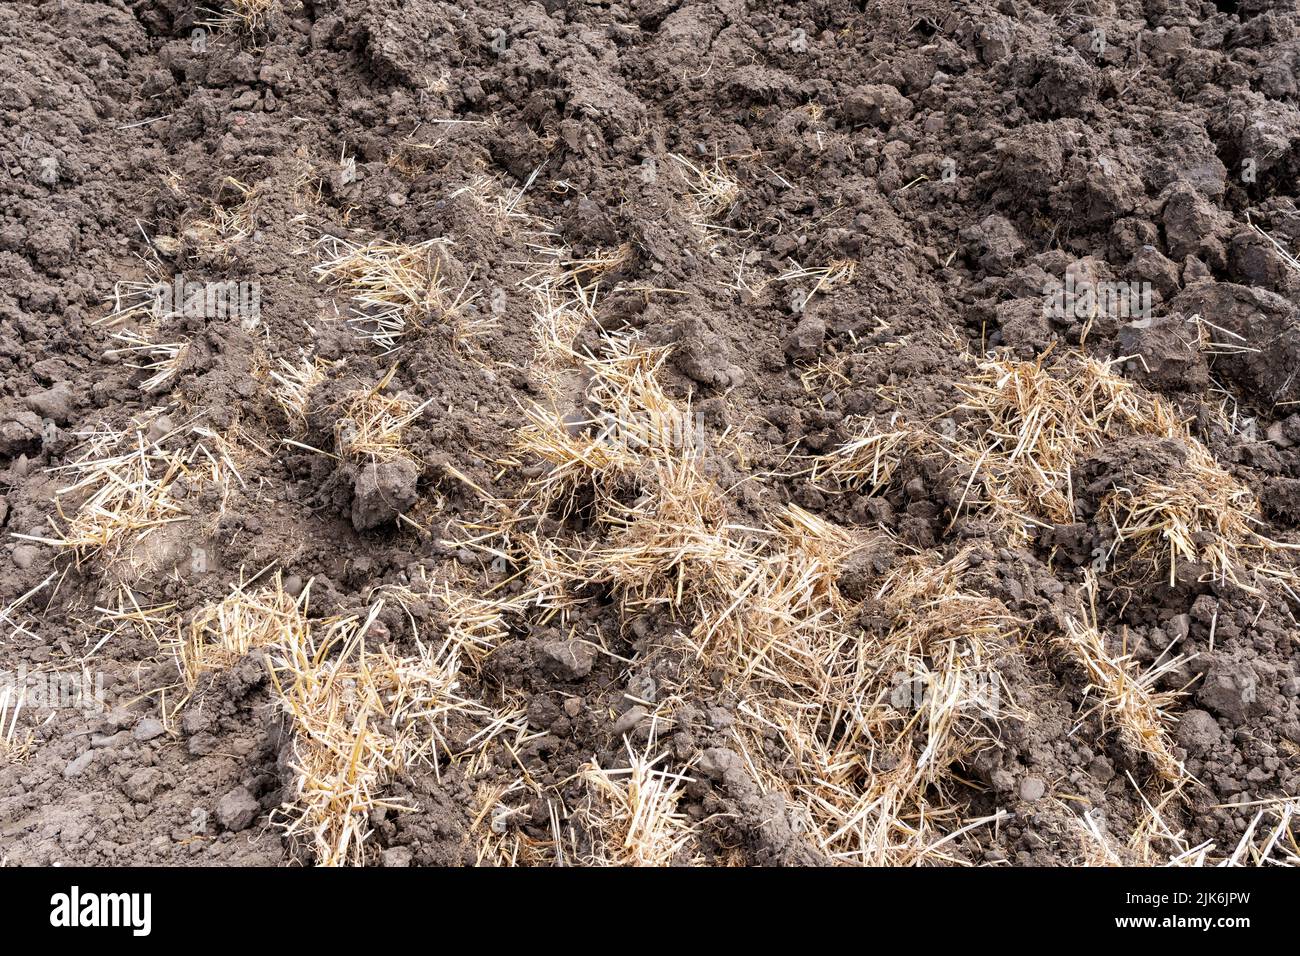 Freshly ploughed soil, with straw ploughed in to help improve soil structure and fertility. North Yorkshire, UK. Stock Photo